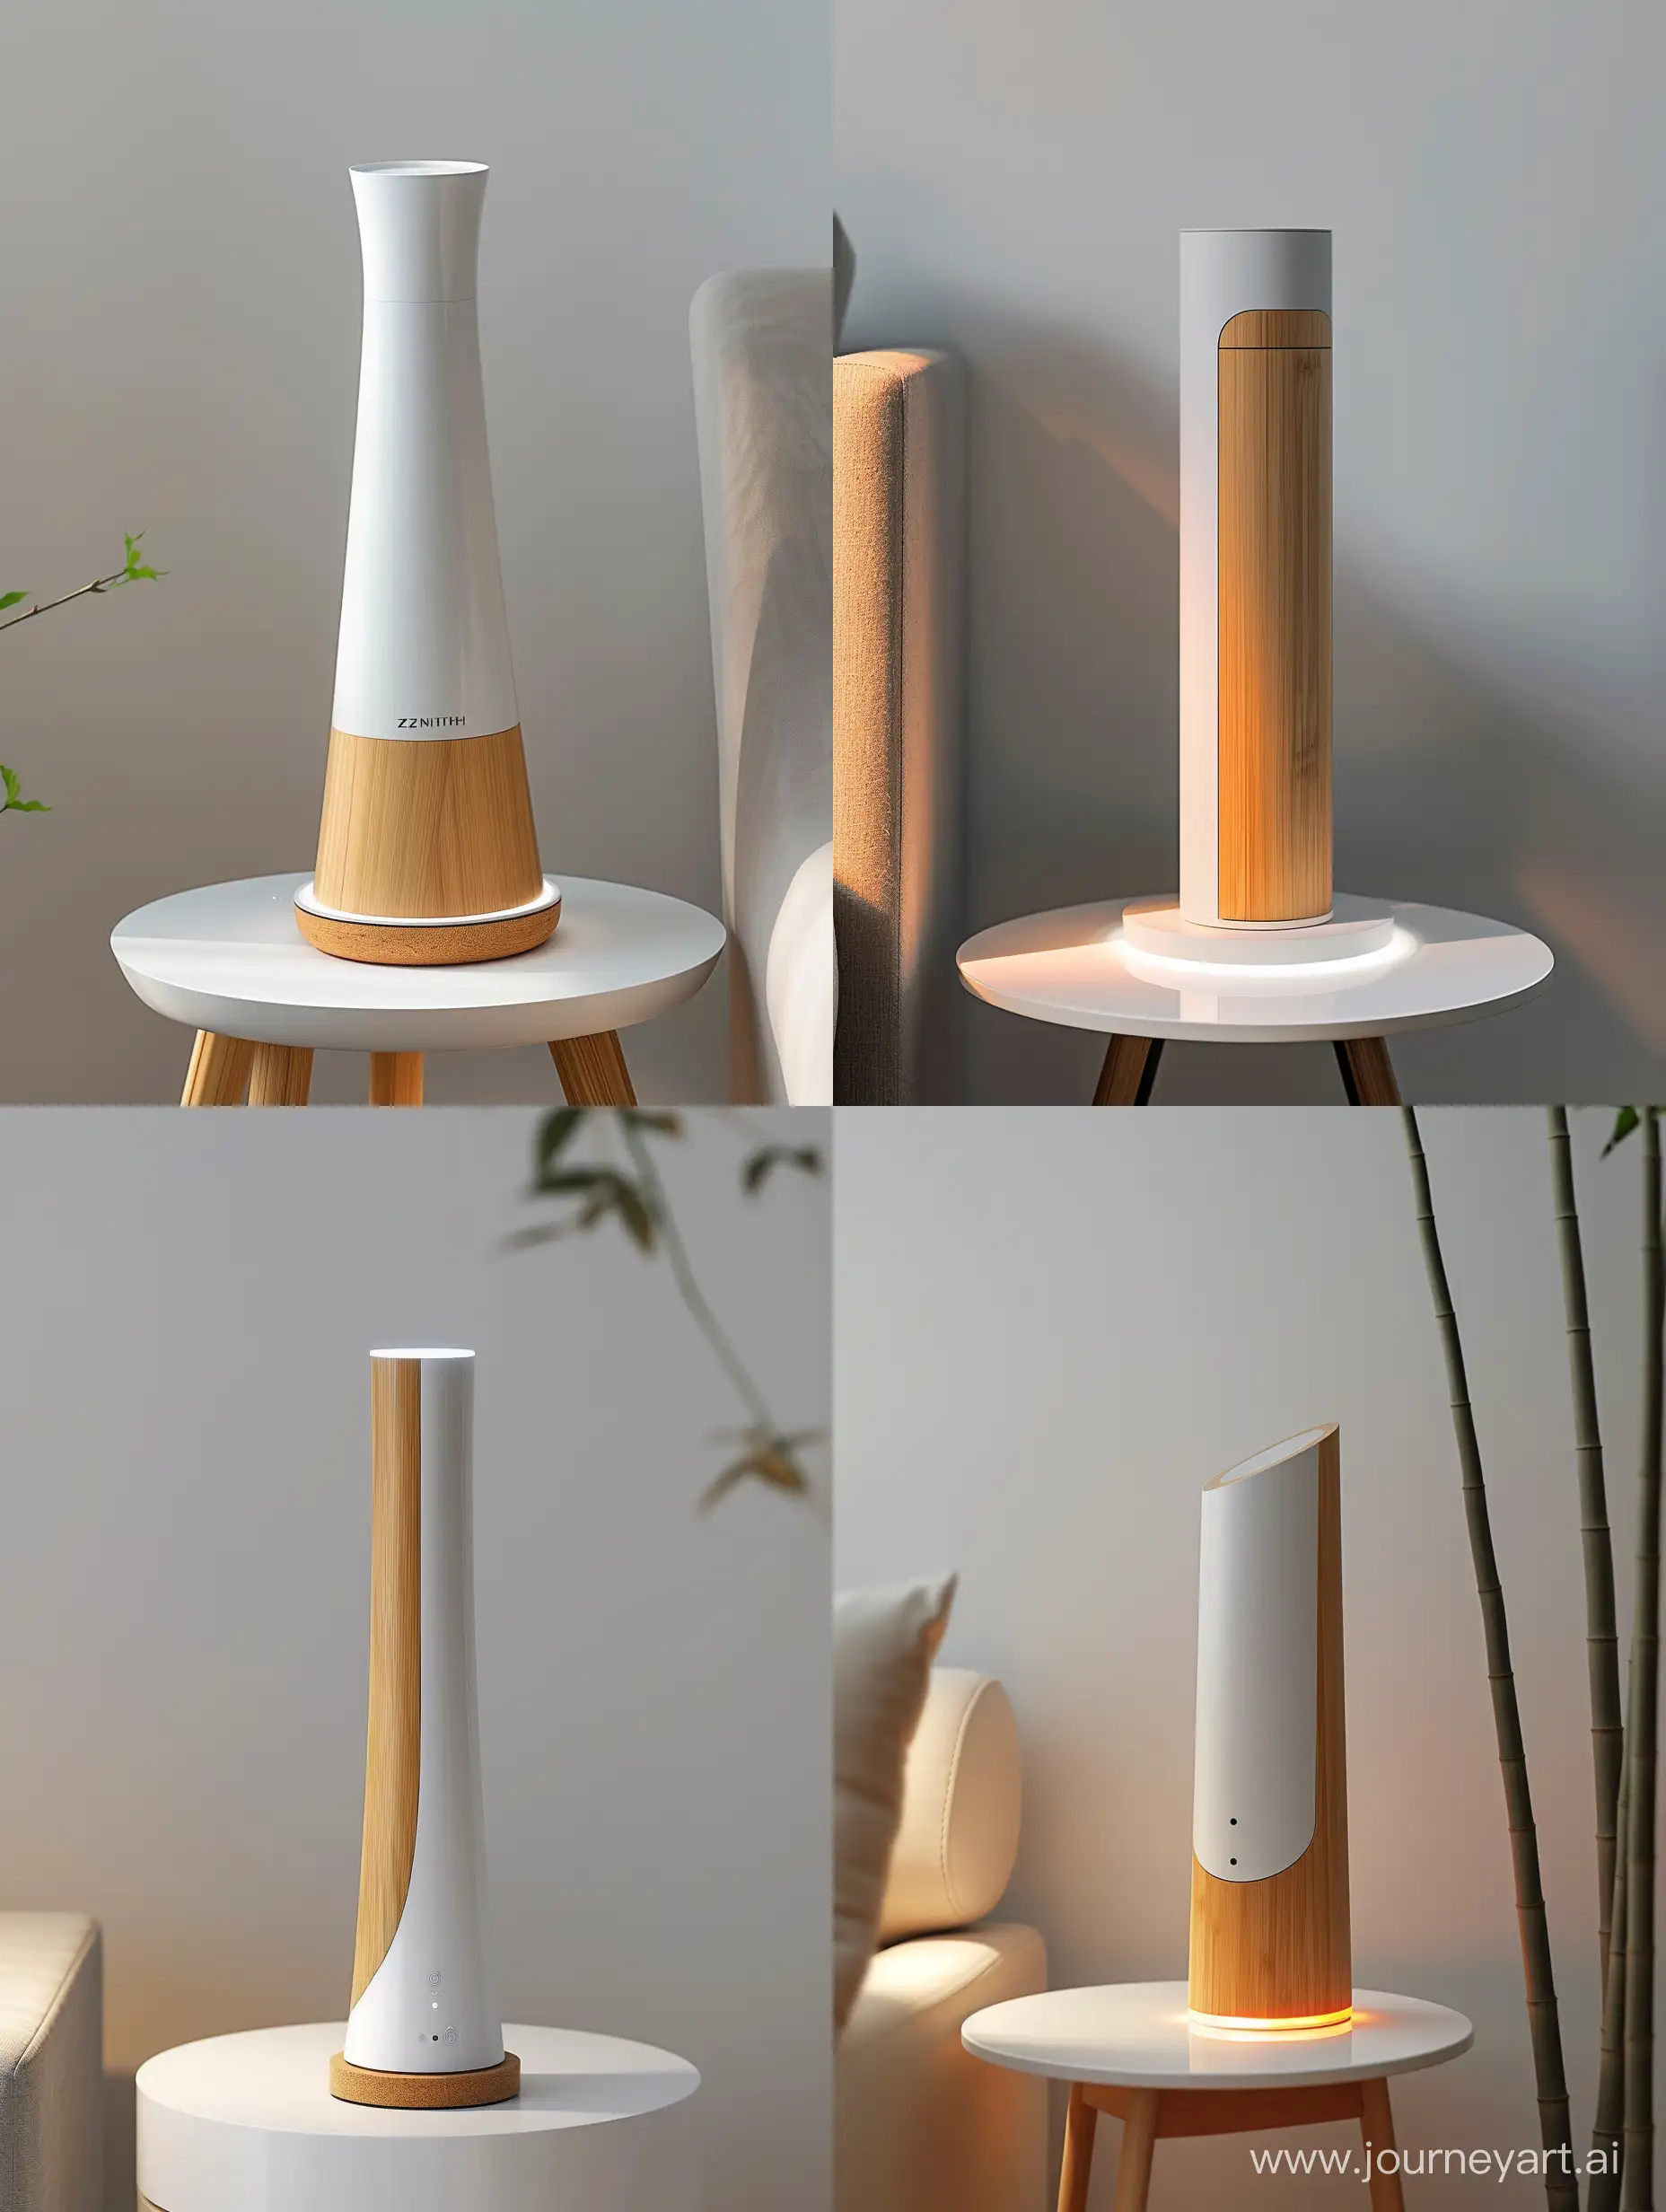 Visualize the Zenith Energy Gateway inspired of zen bamboo form  as a pinnacle of smart home energy management, blending modern design with environmental consciousness. This device embodies minimalism with its sleek, vertical silhouette, slightly tapered at the top for a subtle dynamic edge. Standing 30 cm tall with an 8 cm circular base diameter, its base is crafted from sustainable bamboo, offering a warm, natural aesthetic that speaks to eco-friendliness. The body, made from recycled plastics, shines in a pristine white or soft light gray, designed to complement any smart home decor with its understated elegance.The Zenith Energy Gateway features discreet, soft LED lighting at its base and edges, providing ambient illumination and notifications in a sophisticated manner. This lighting enhances the device's futuristic appeal, creating a visual connection between the device and its smart home environment.Designed to be both a functional energy management hub and a statement piece of technology, the Gateway stands on a minimalist side table or is mounted on a clean, white wall, integrating seamlessly into the smart home aesthetic. Its form factor and material choice symbolize a commitment to sustainability, innovation, and design excellence, aiming to resonate with modern homeowners who prioritize eco-conscious living without compromising on style.The image should capture the essence of the Zenith Energy Gateway in a contemporary setting, highlighting its role as an elegant, technologically advanced, and environmentally friendly addition to the smart home.product design style